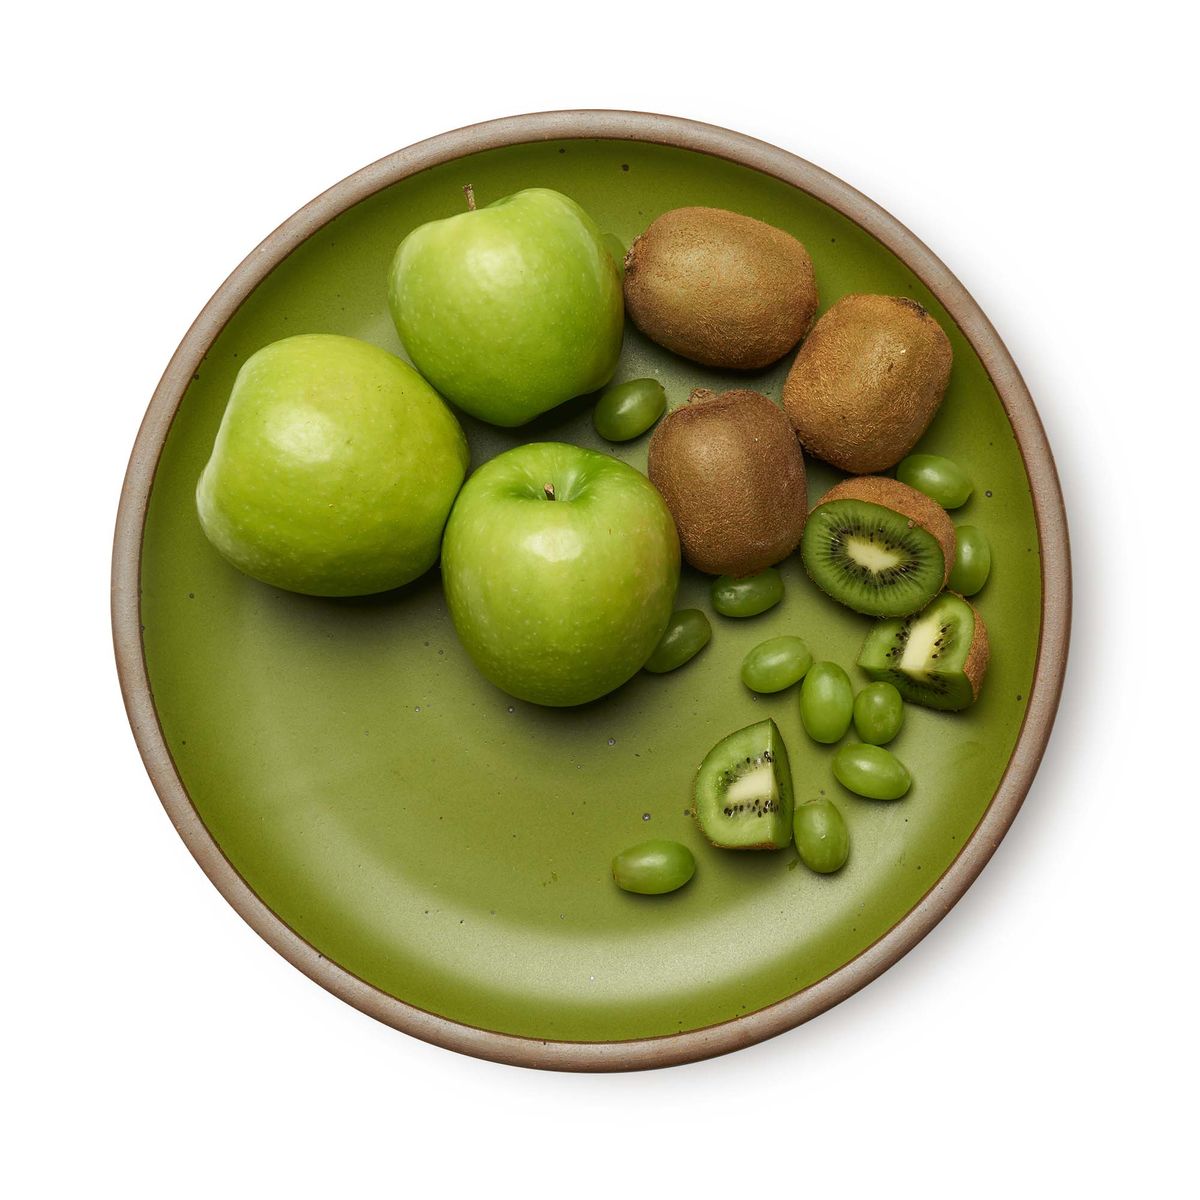 The Serving Platter in Fiddlehead, a mossy, olive green. Pictured here with an array of fruit: three granny smith apples, kiwis, and green grapes, with plenty of room for more fruits to be added.